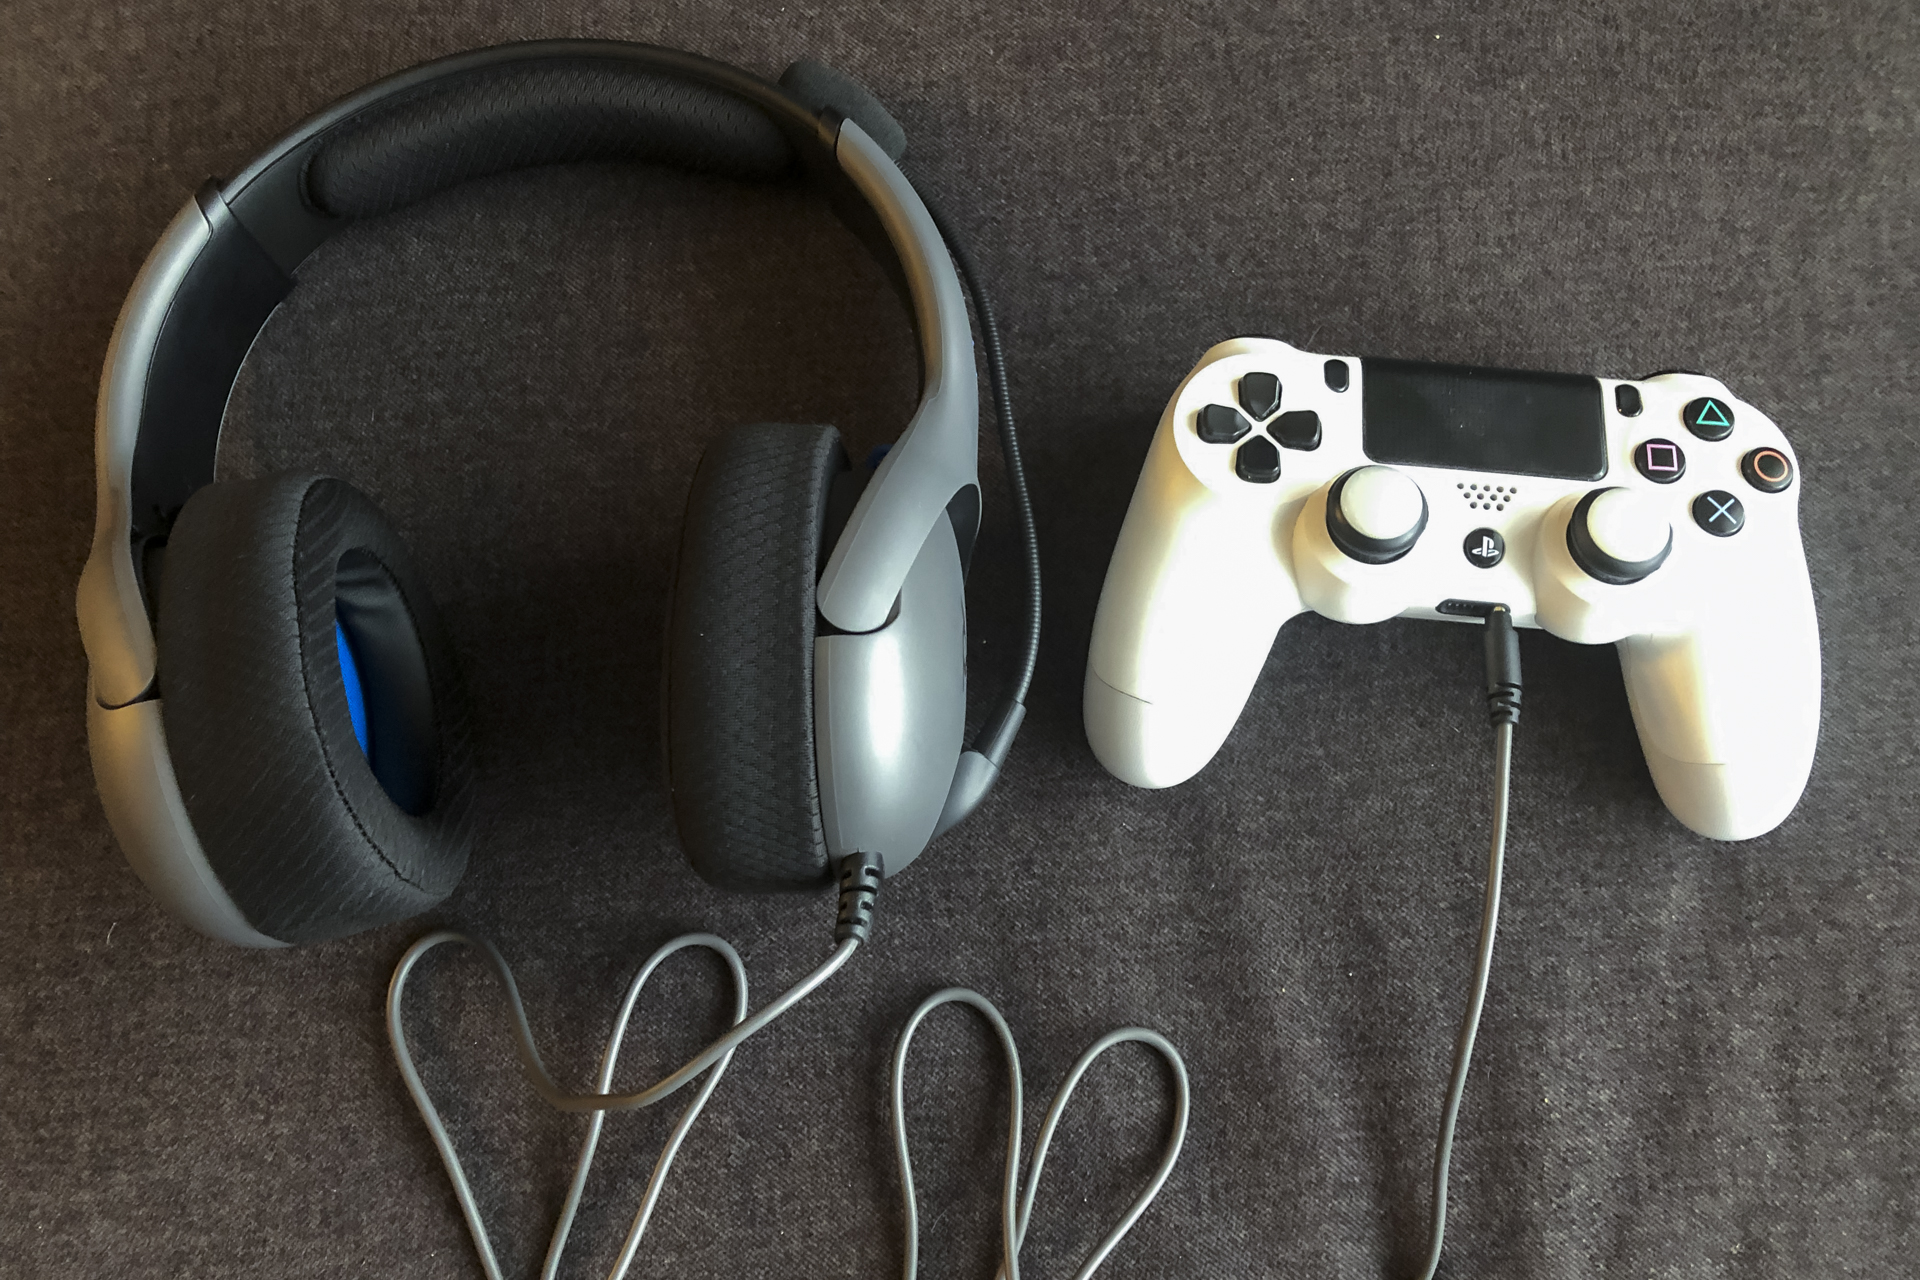 The PDP LVL 50 Headsets Prove Price Doesn't Always Equal Quality